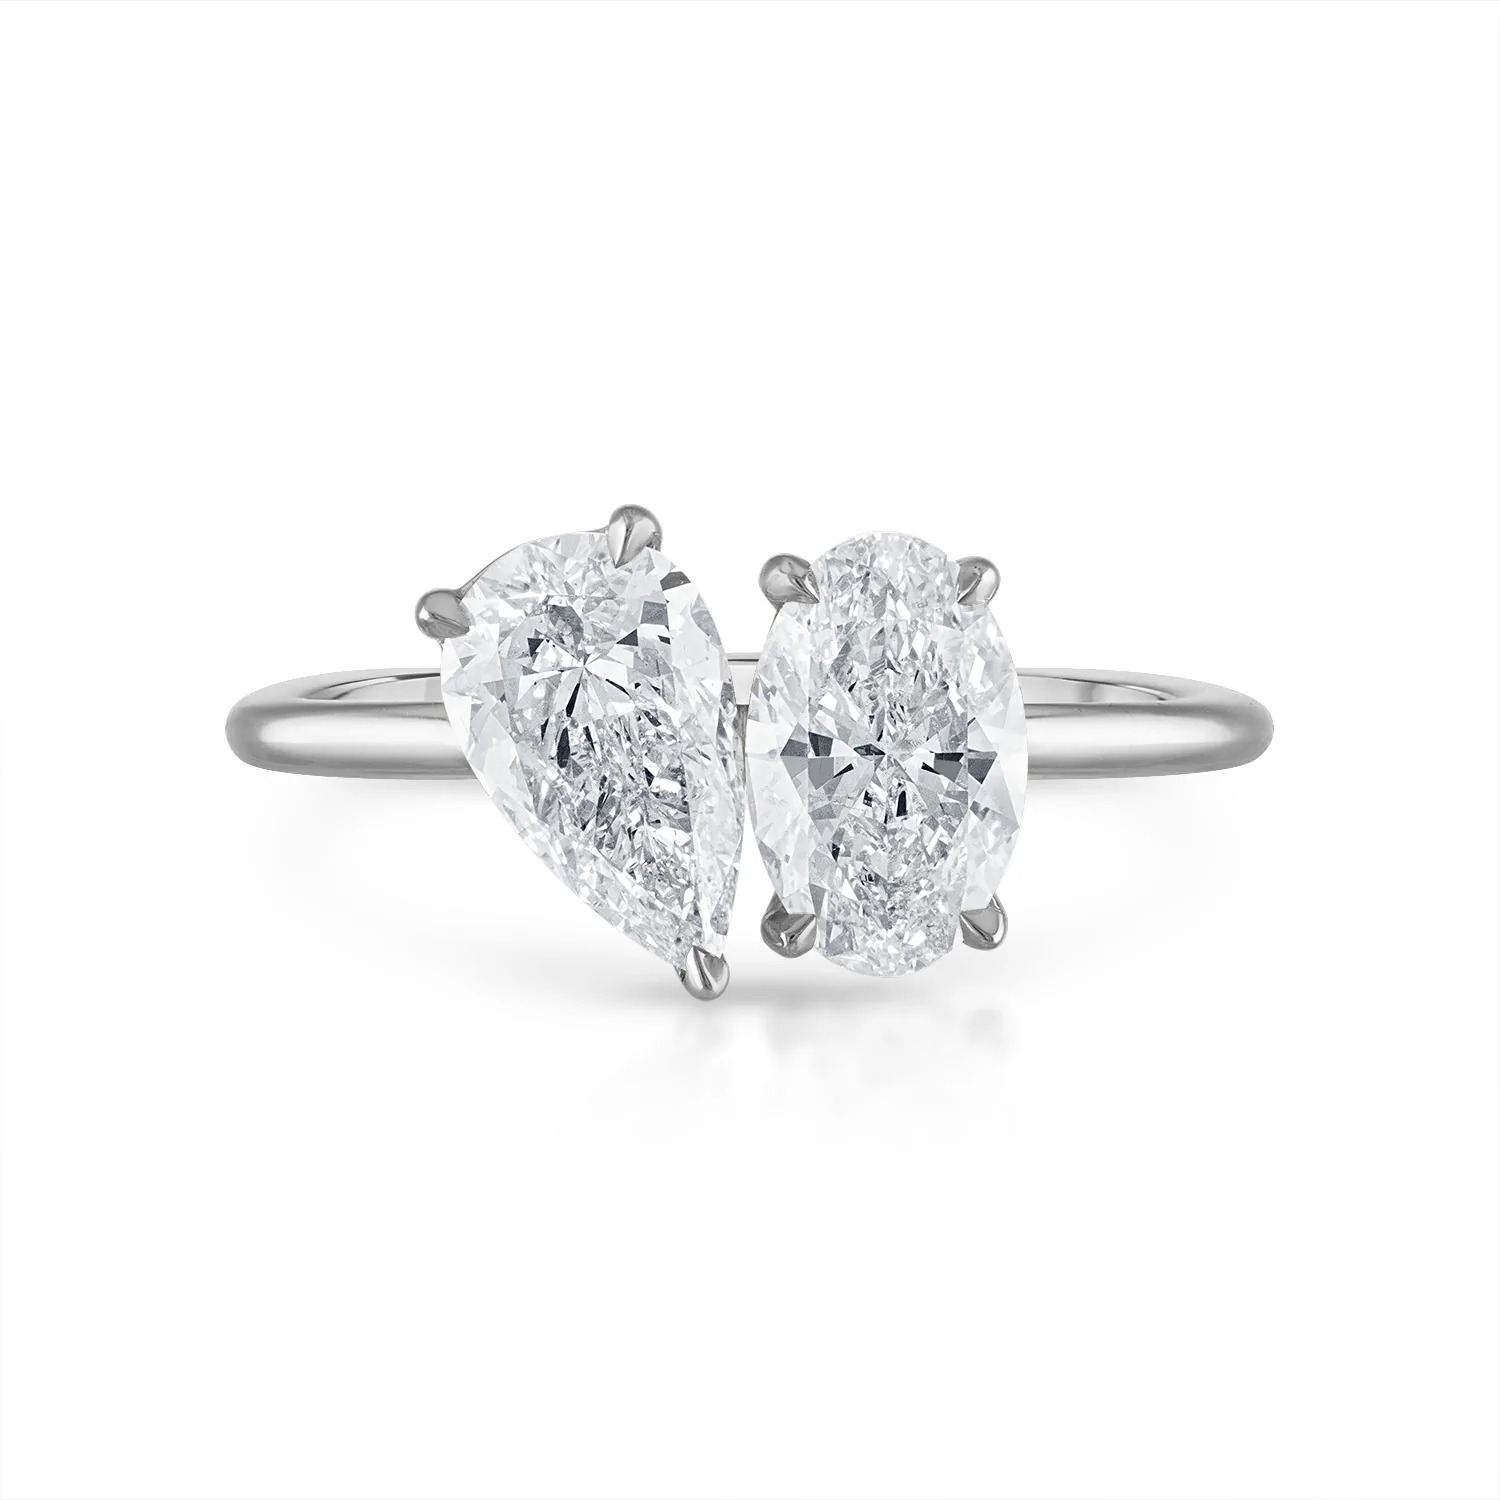 4 Engagement Ring Trends That'll Never Go Out of Style | Who What Wear